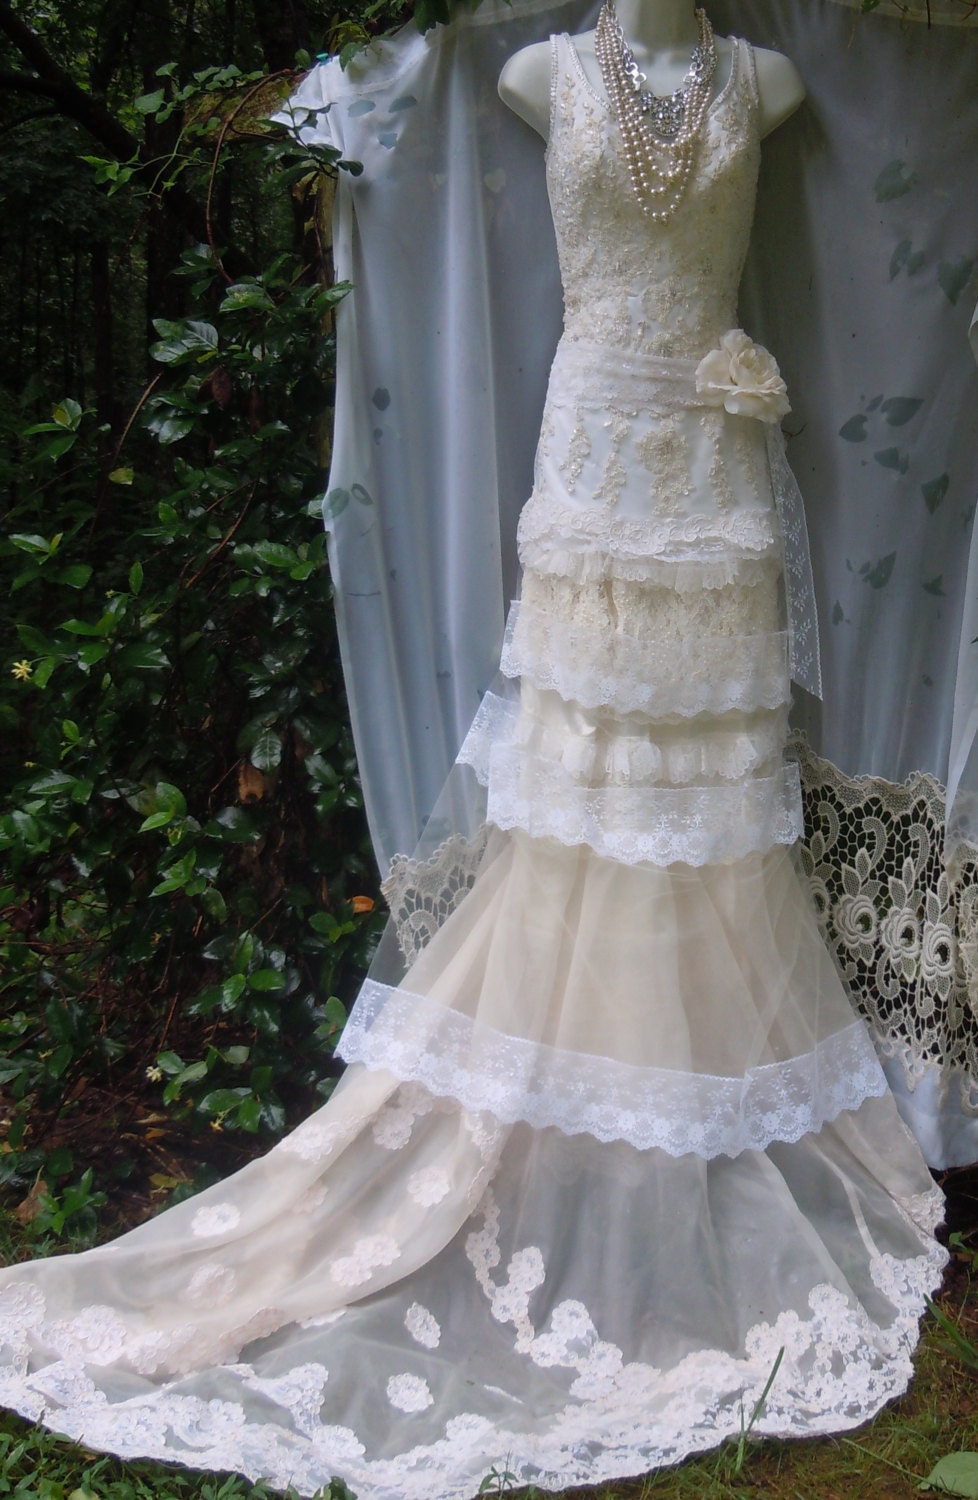 White wedding dress boho mermaid crochet lace vintage beaded tulle bride outdoor romantic small by vintage opulence on Etsy